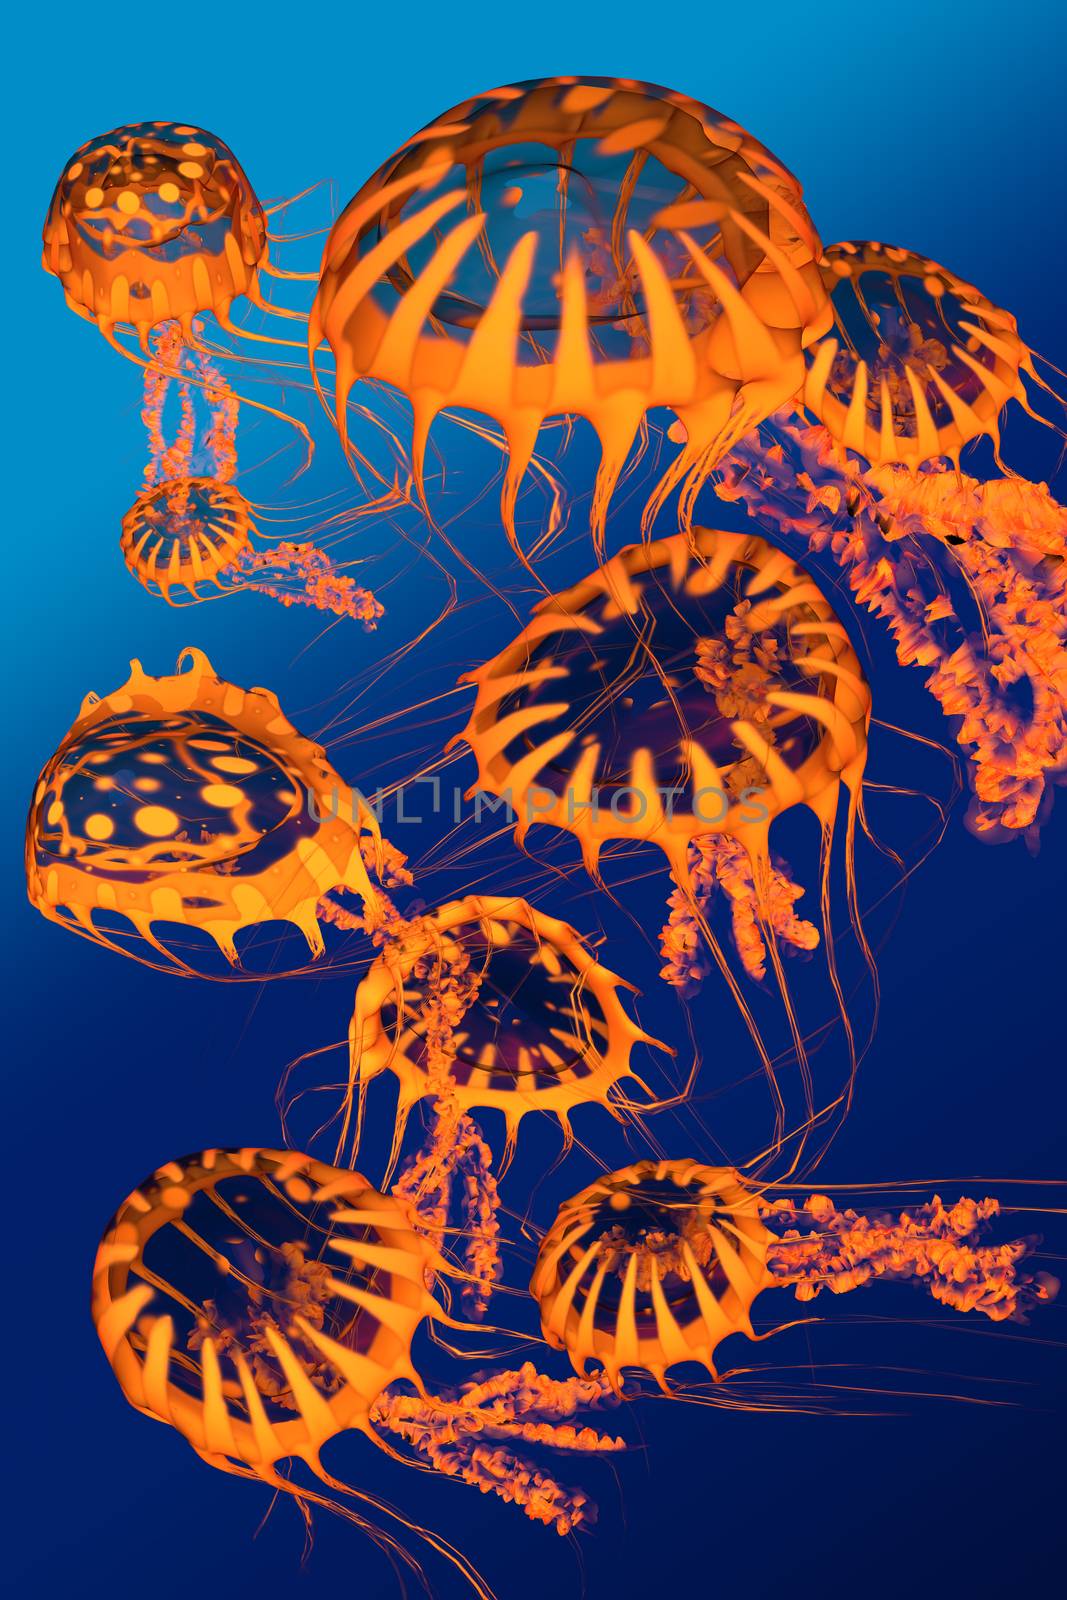 A group of golden jellyfish dance around each other in blue ocean surface waters.